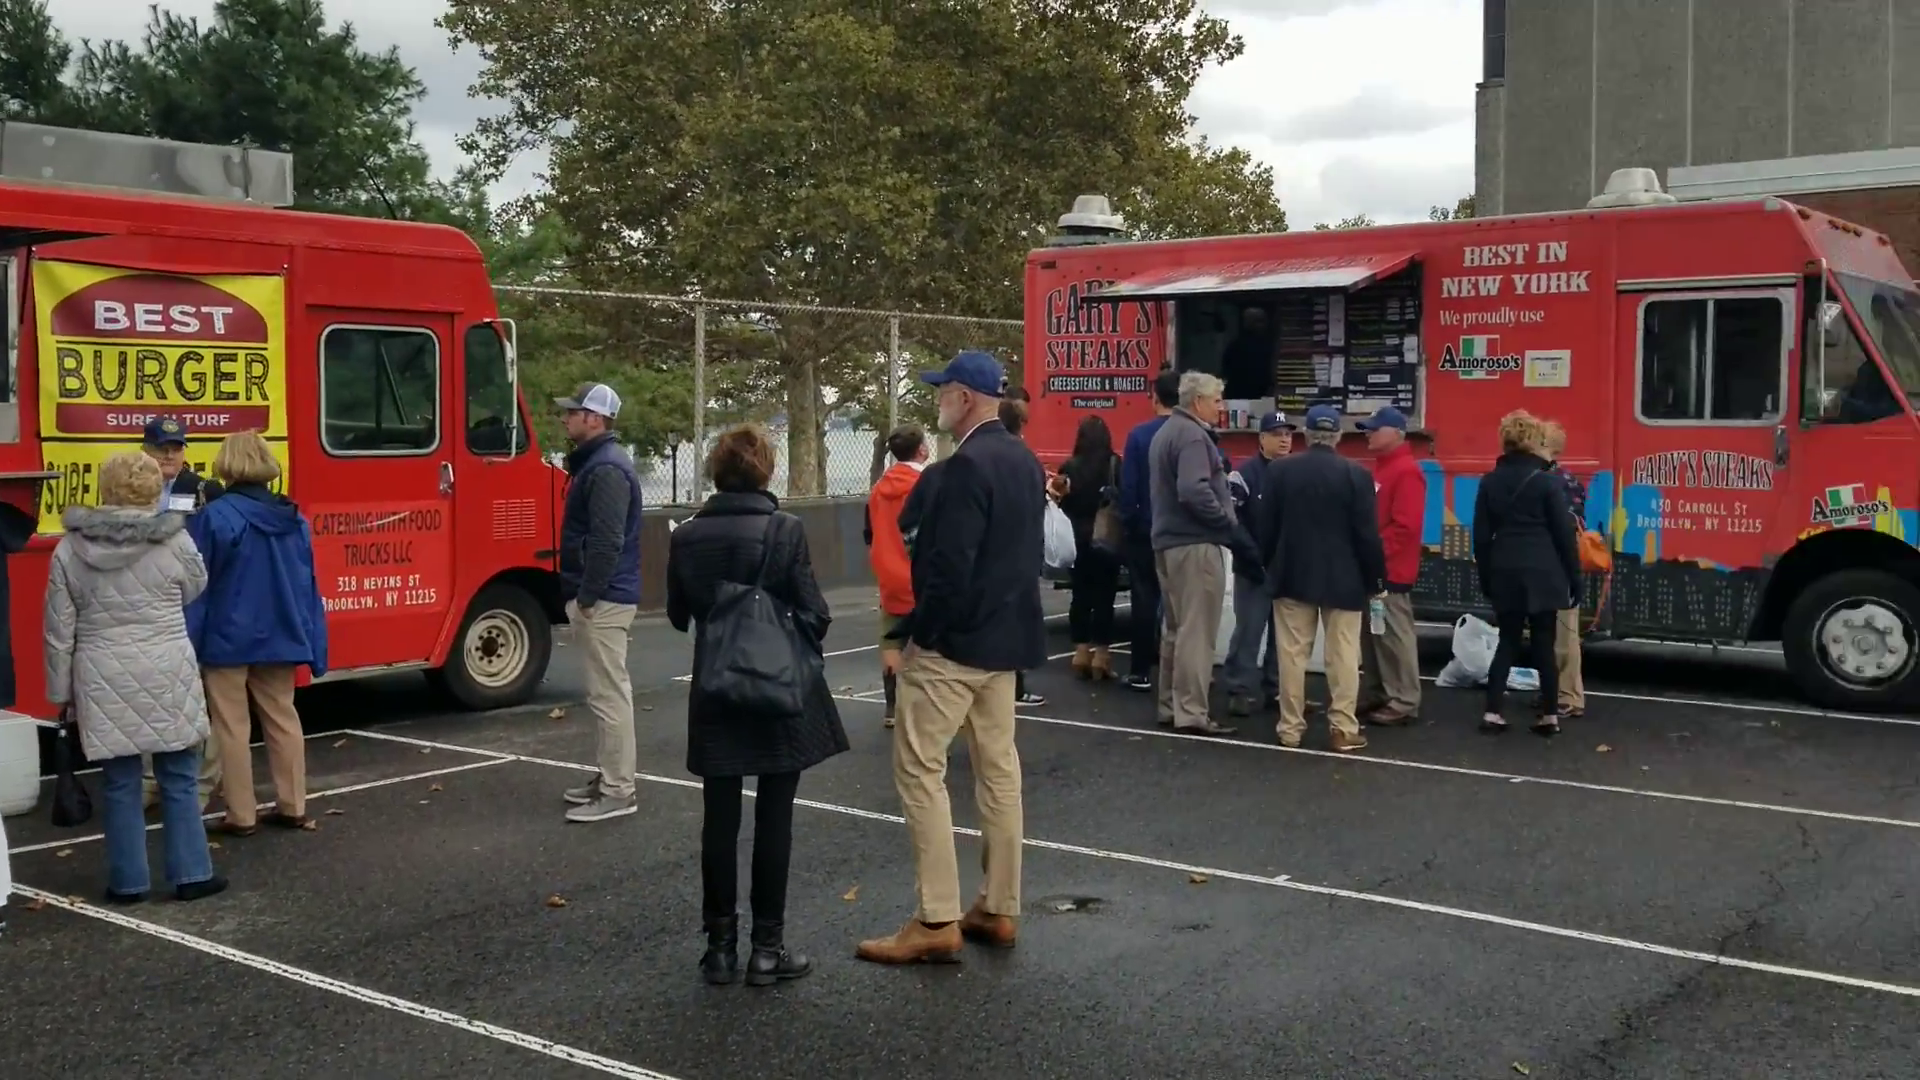 GarysSteaks and best burger for the bronx college food truck rental homecoming